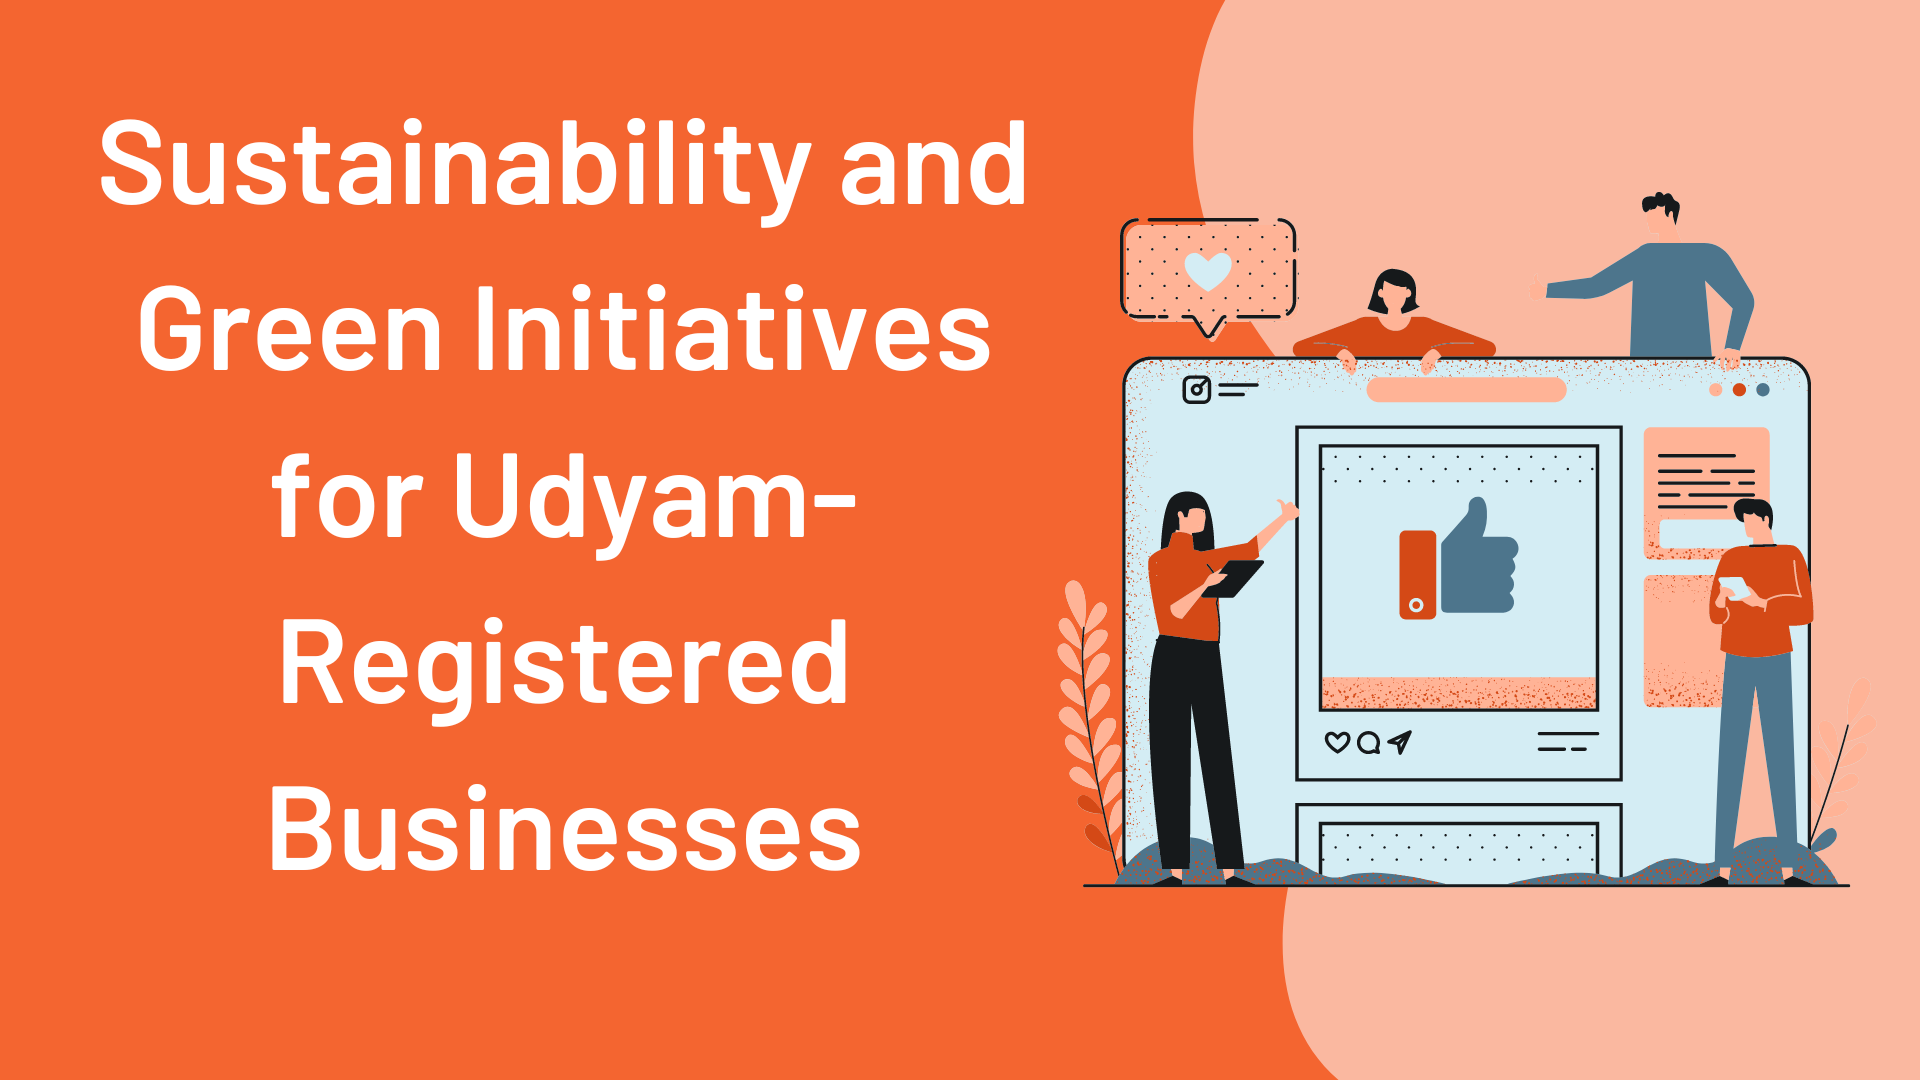 Sustainability and Green Initiatives for Udyam-Registered Businesses